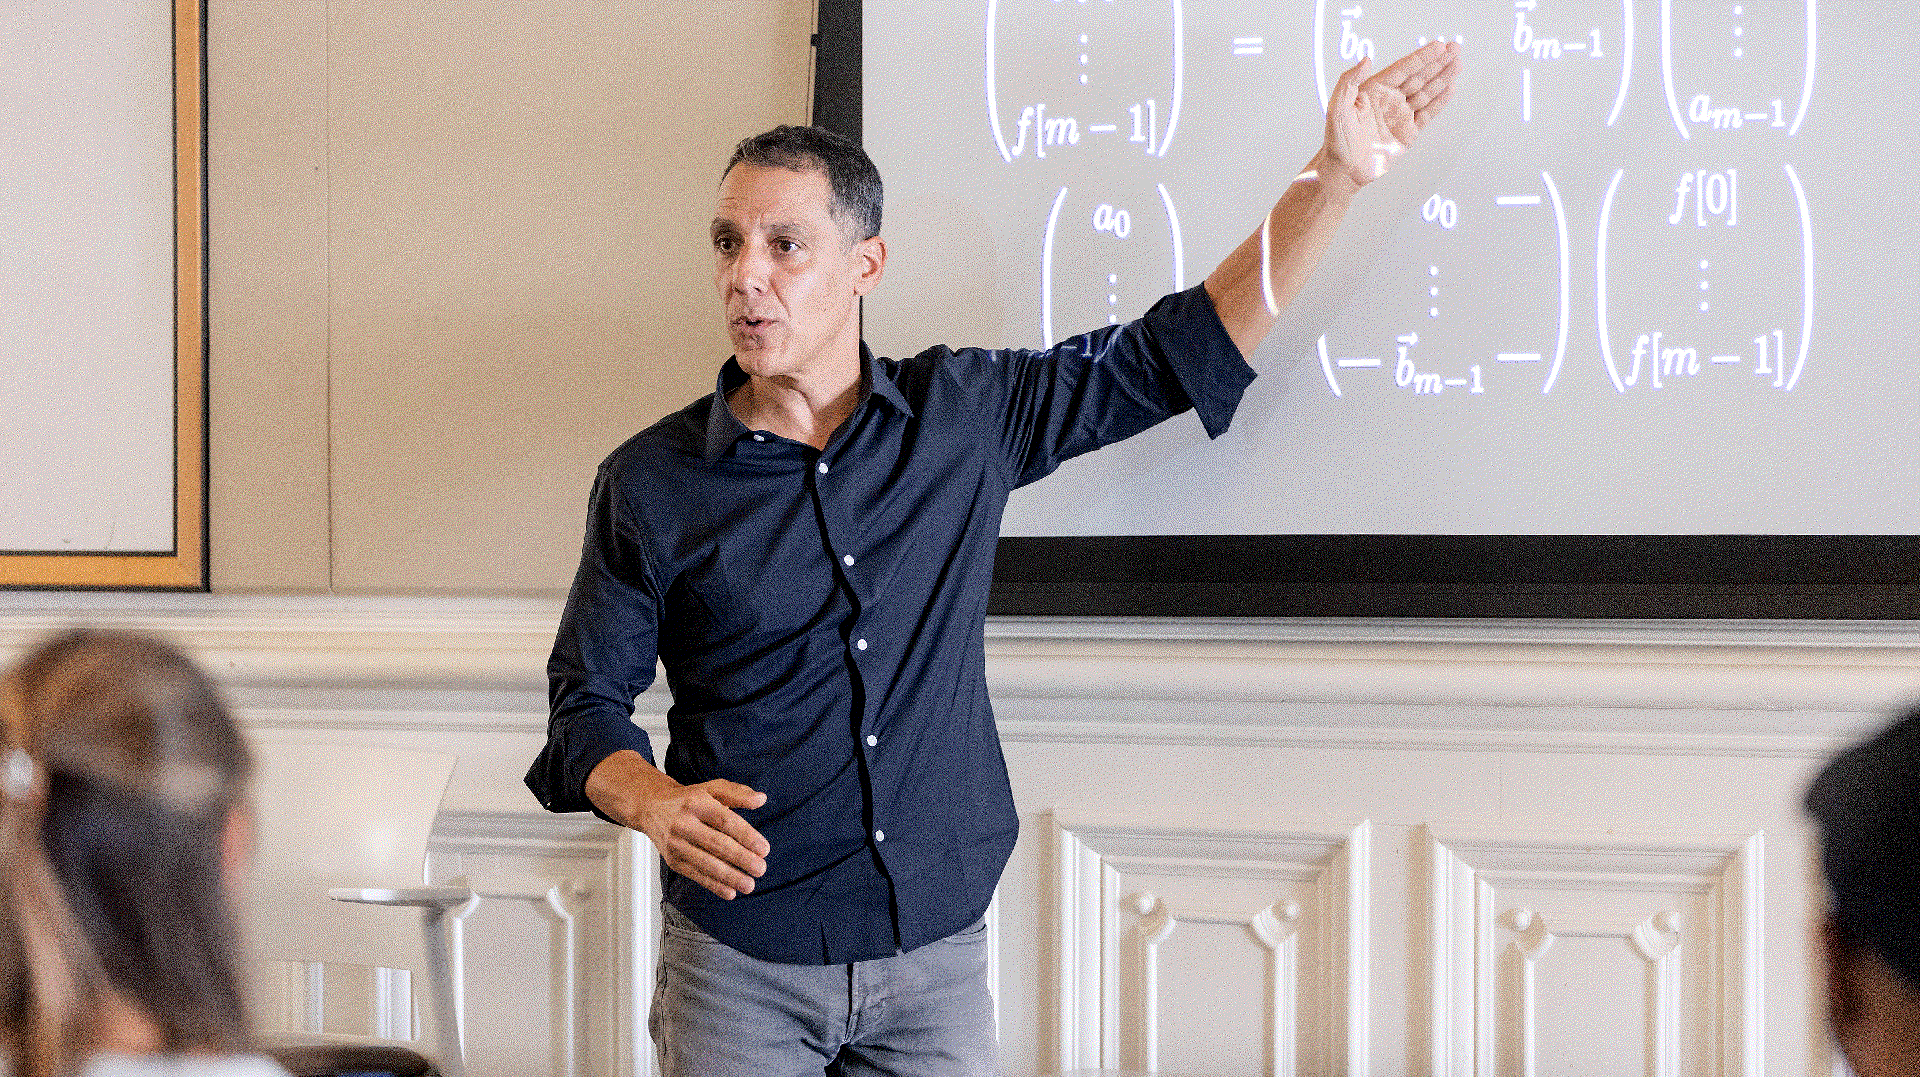 UC Berkeley professor Hany Farid stands at the front of a classroom, gesturing at equations projected onto a large screen 